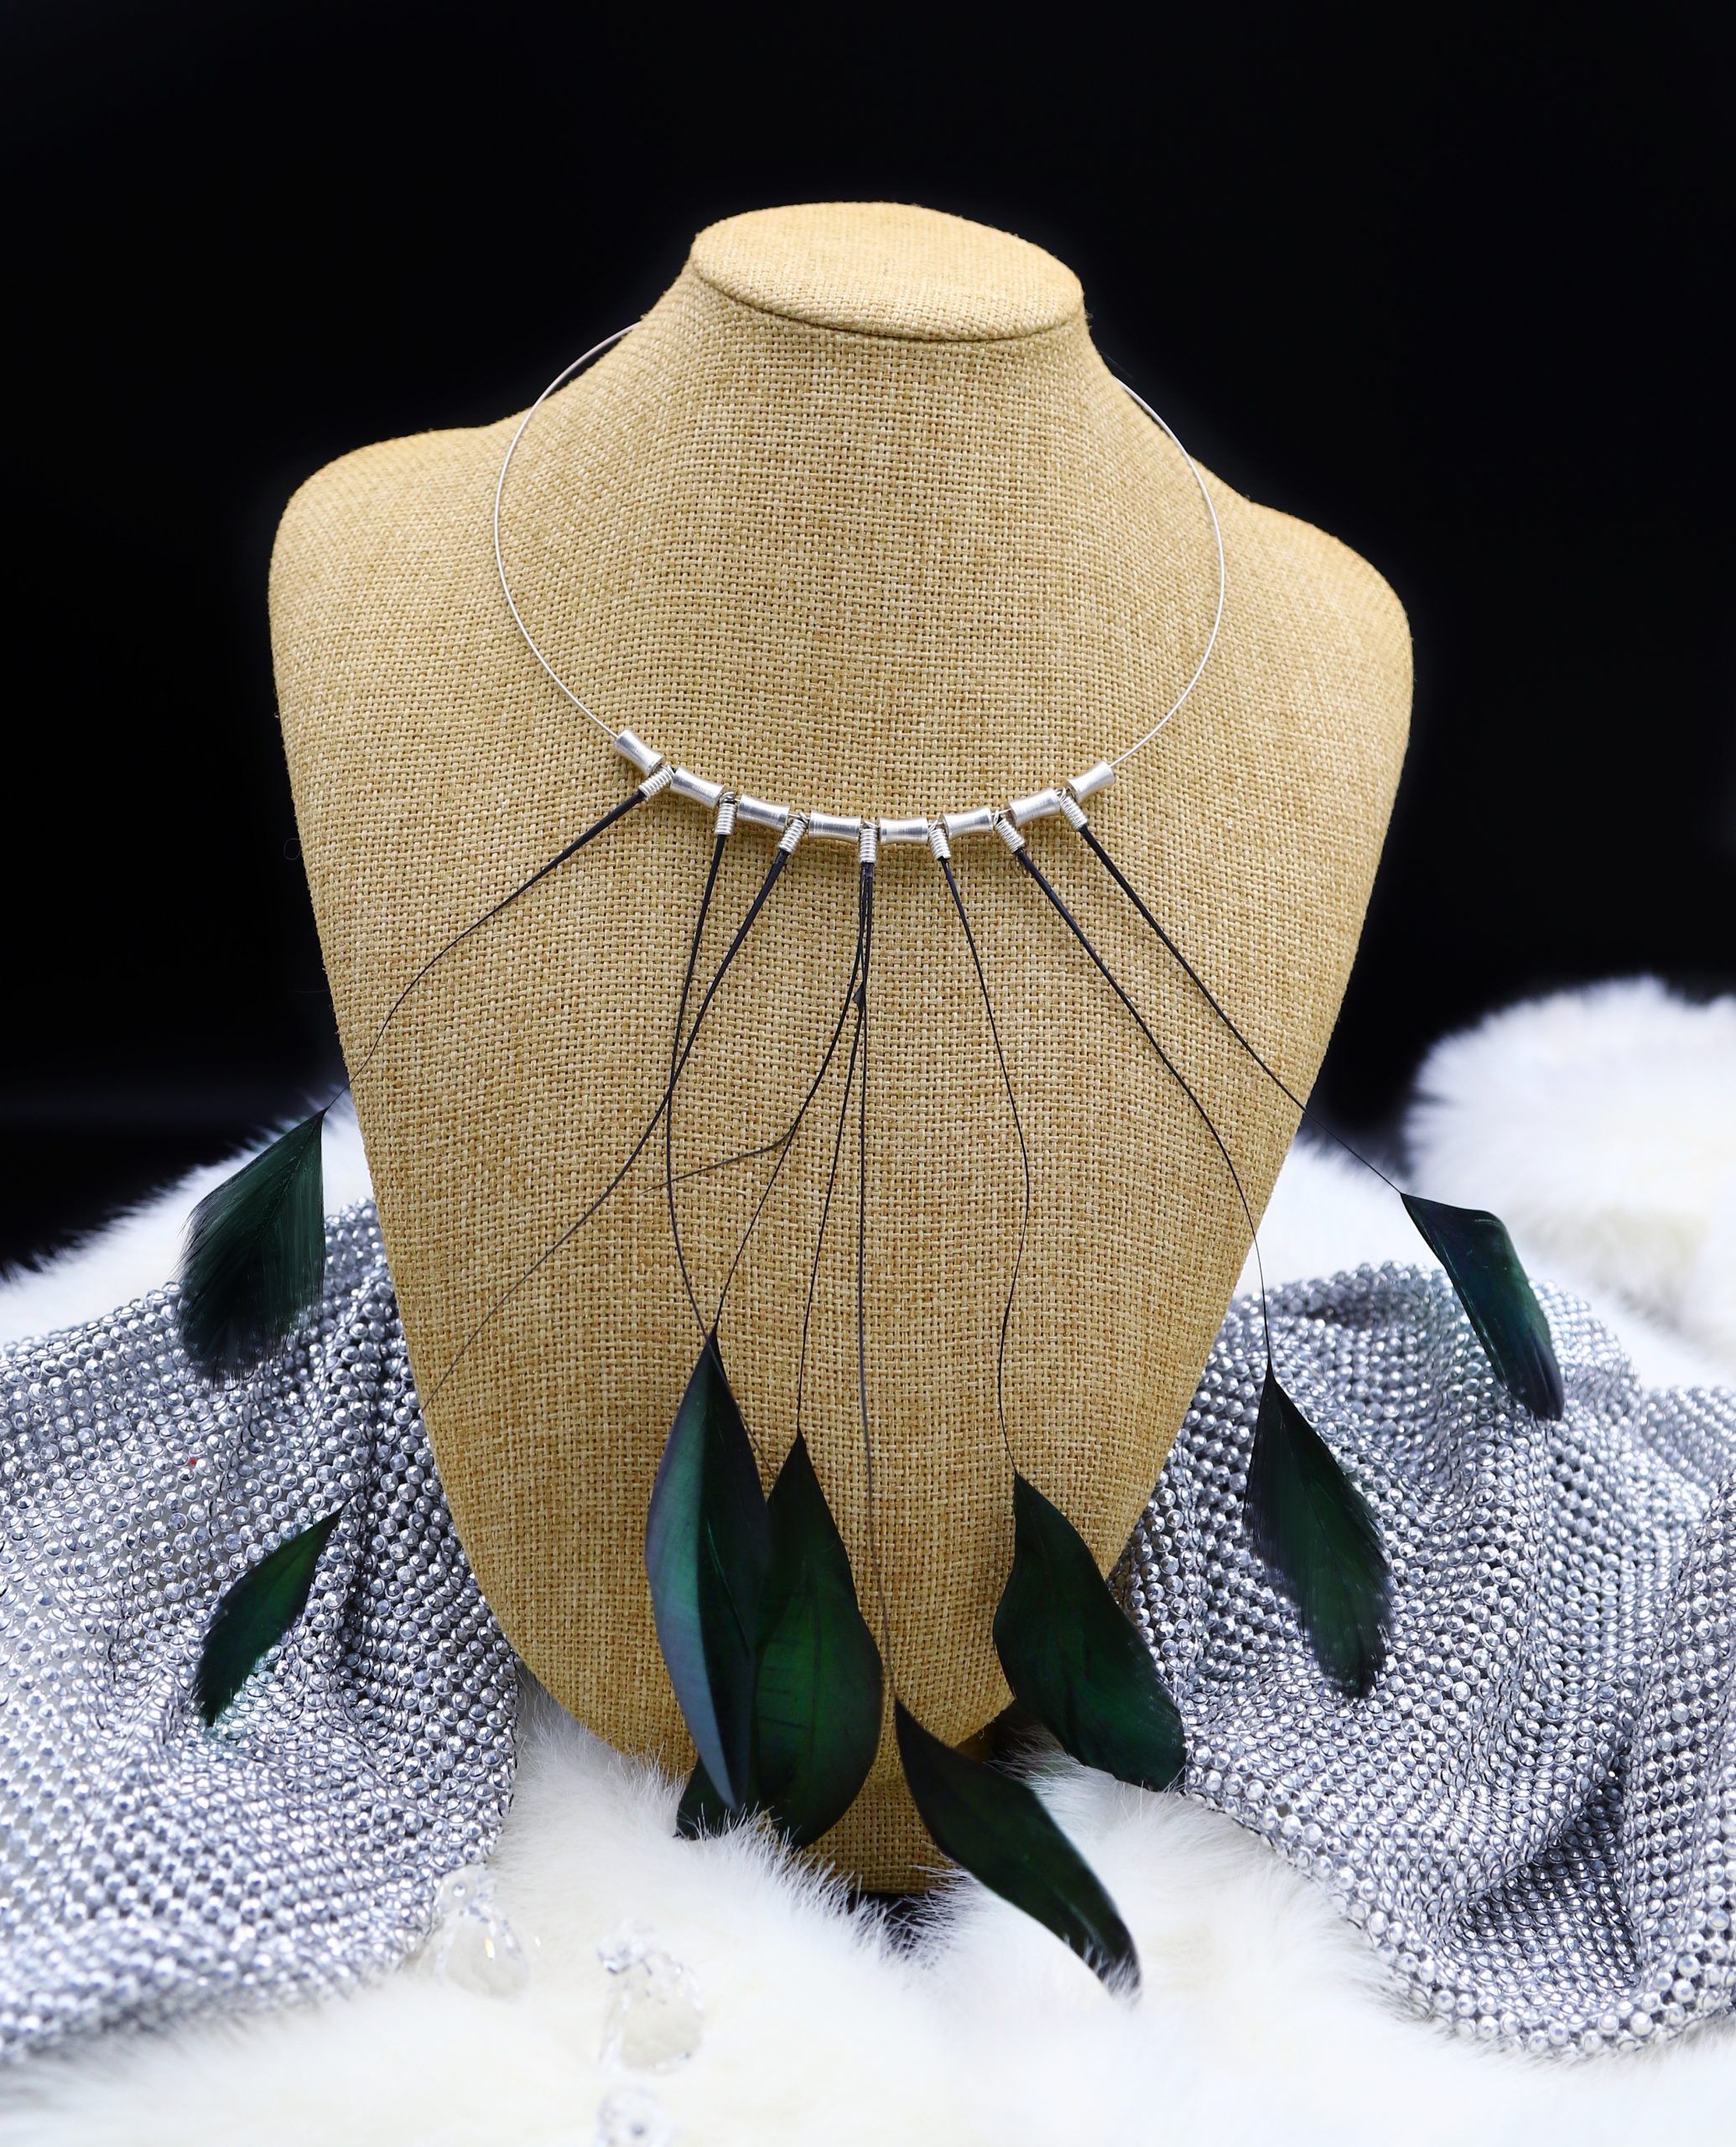 Feather necklace